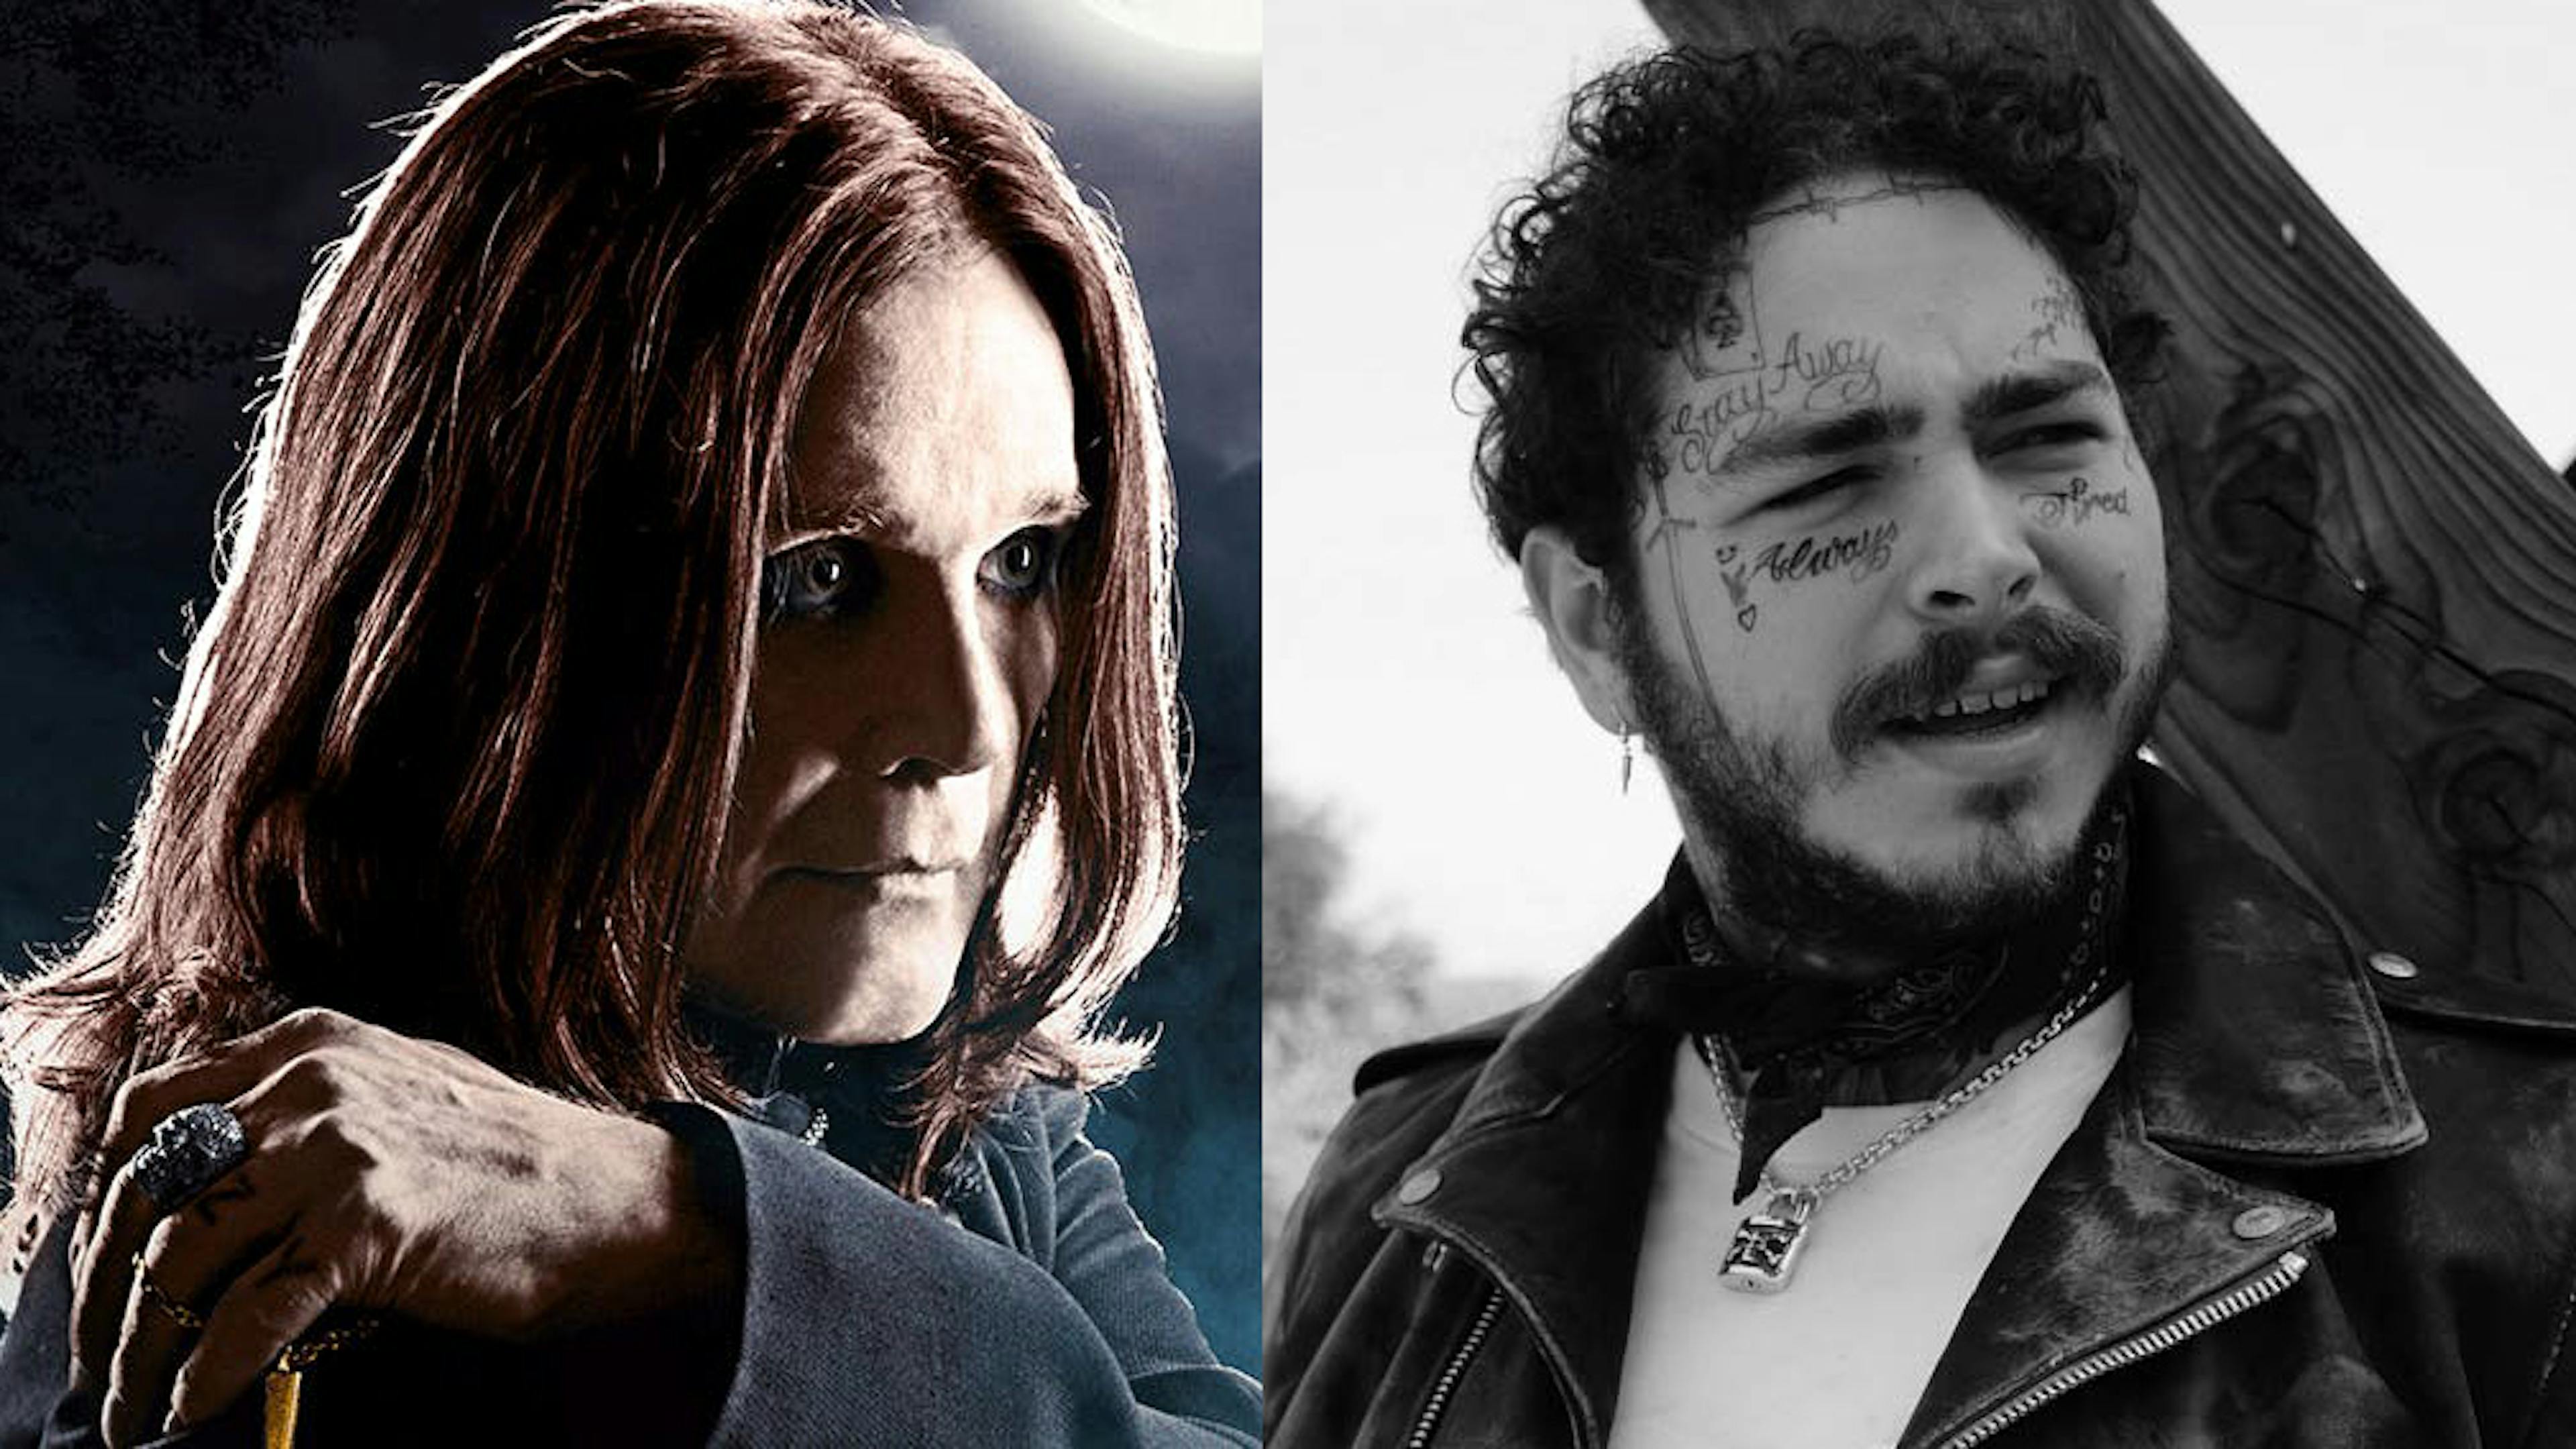 Post Malone Has Revealed The Name Of The Song That He Collaborated On With Ozzy Osbourne